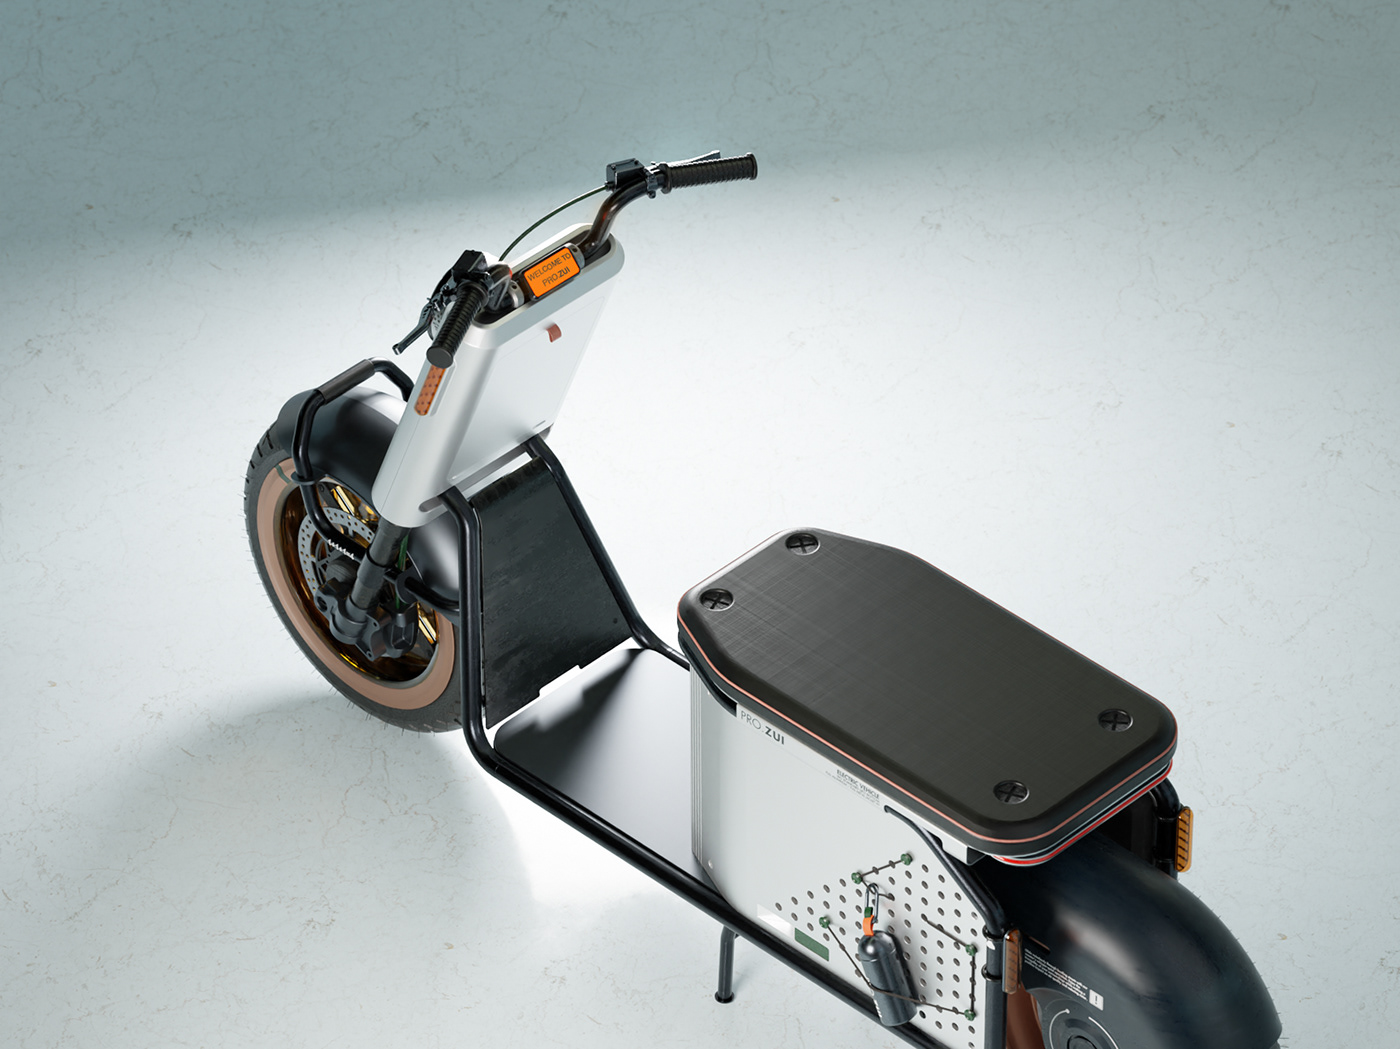 Scooter industrial design  eco electric product design  tech motorcycle design transportation automotive  